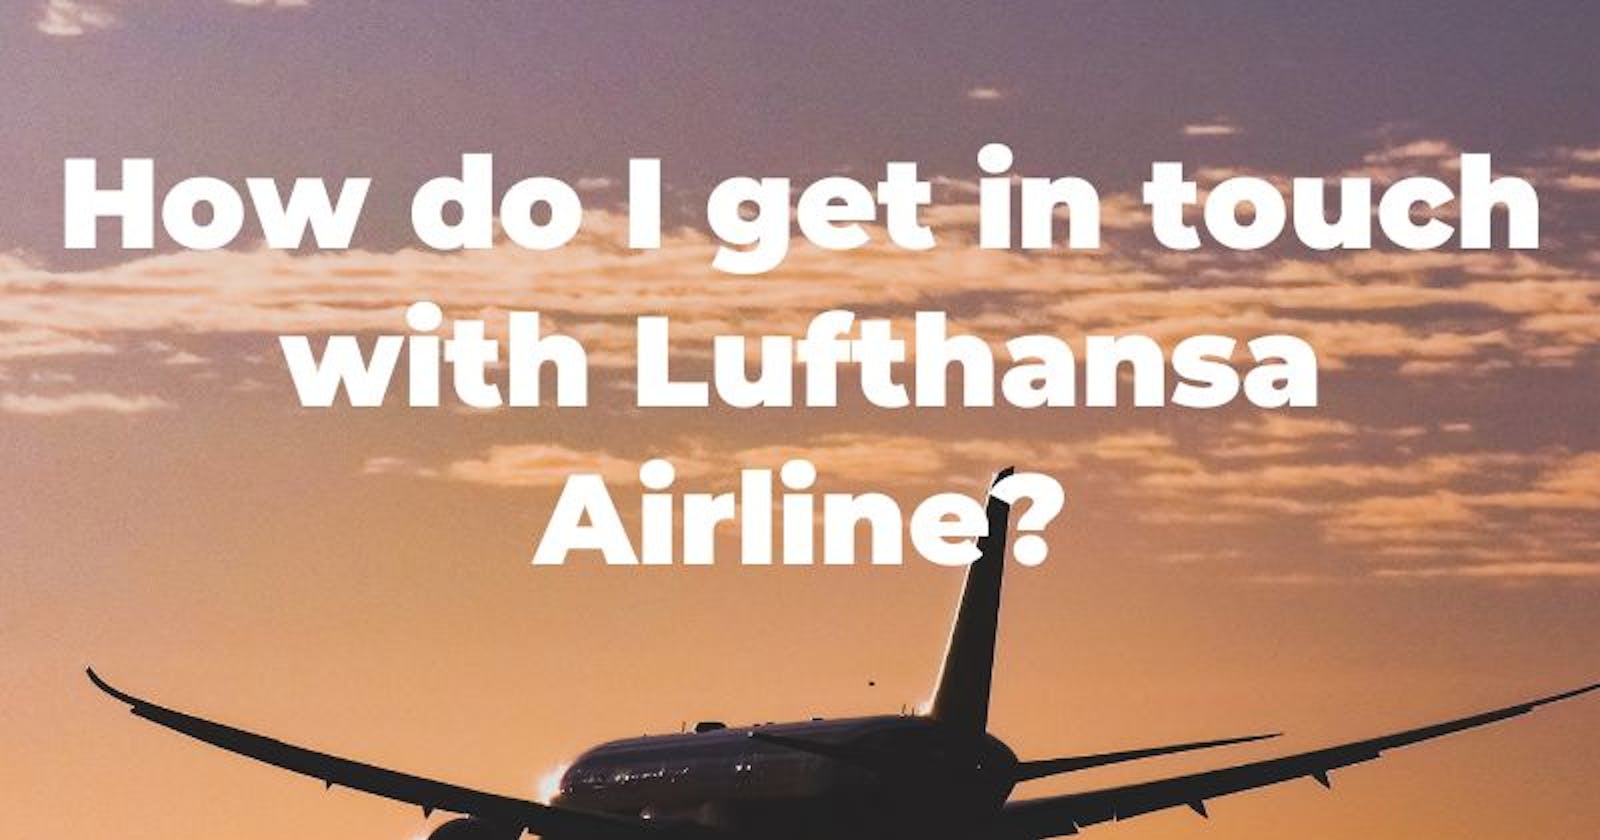 How do I get in touch with Lufthansa Airline?